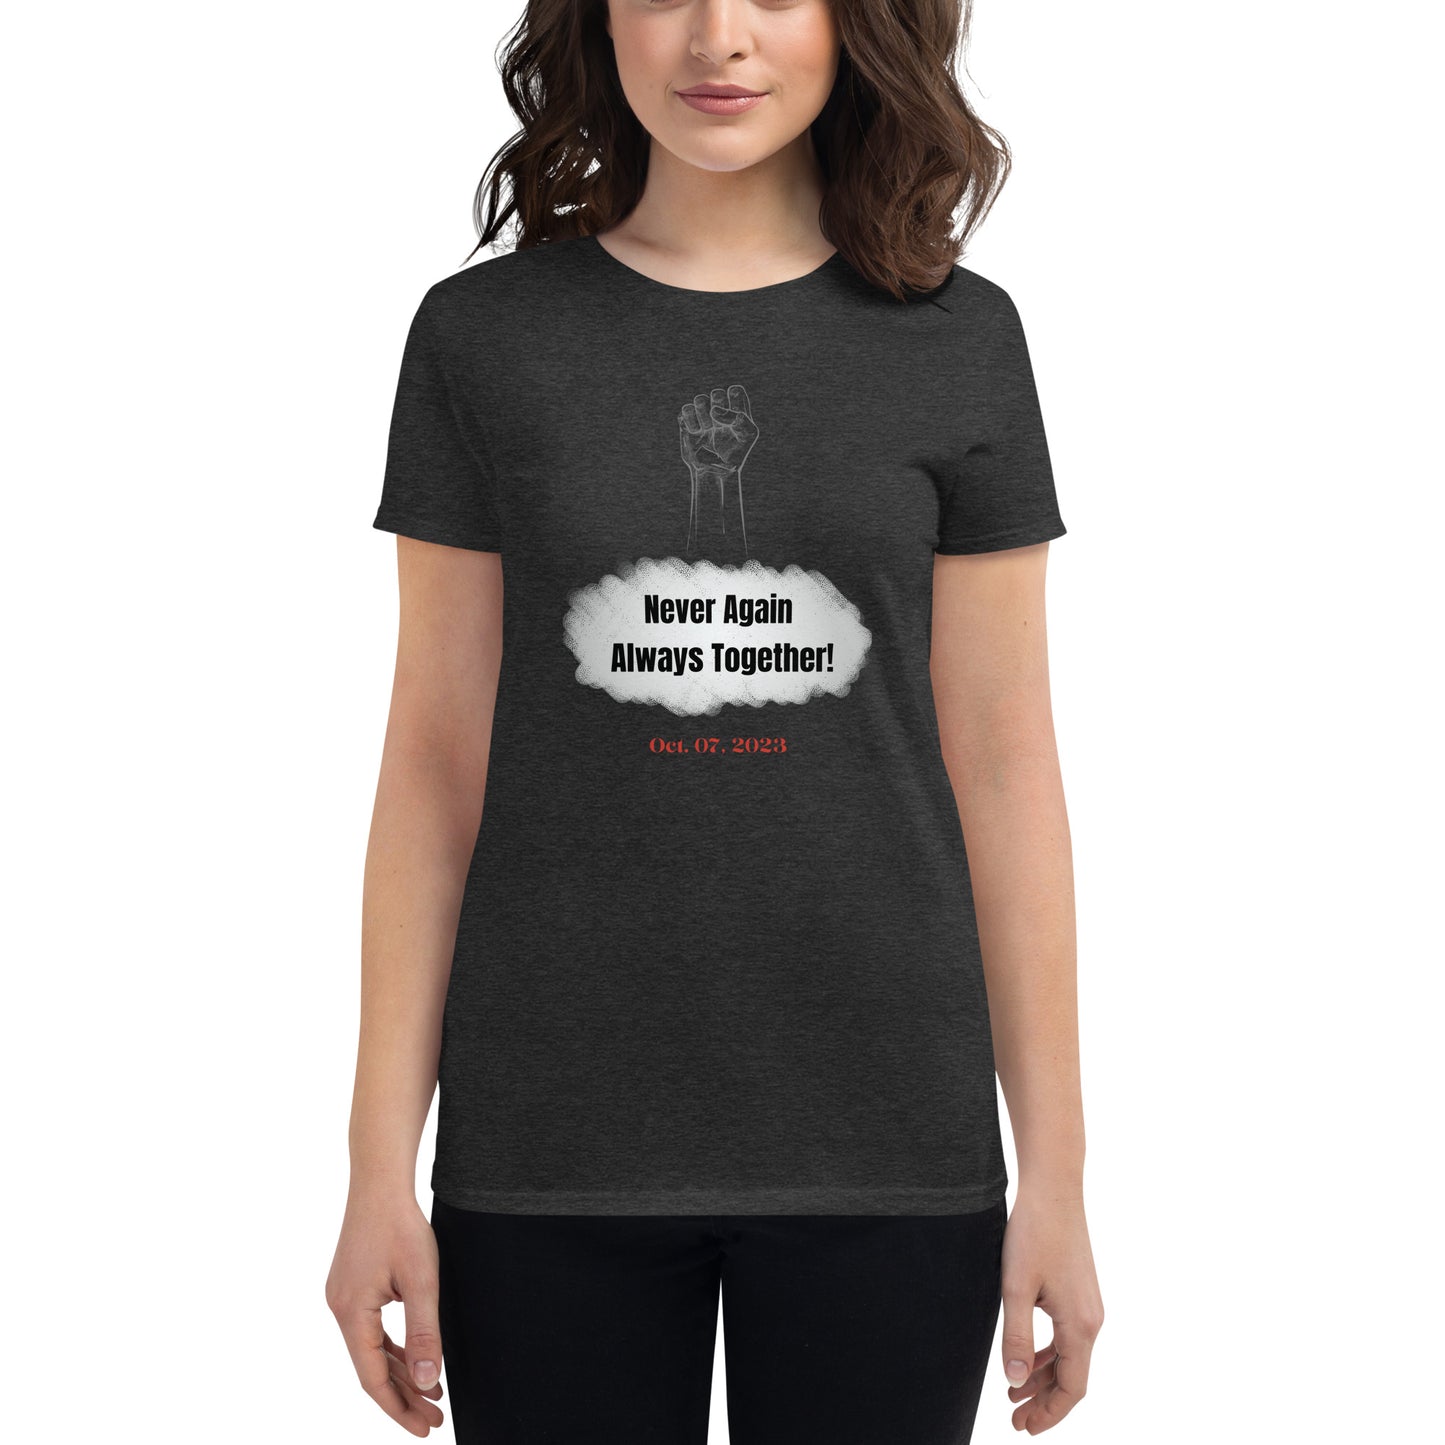 Never again. Always together - Women's short sleeve t-shirt (5 colors)